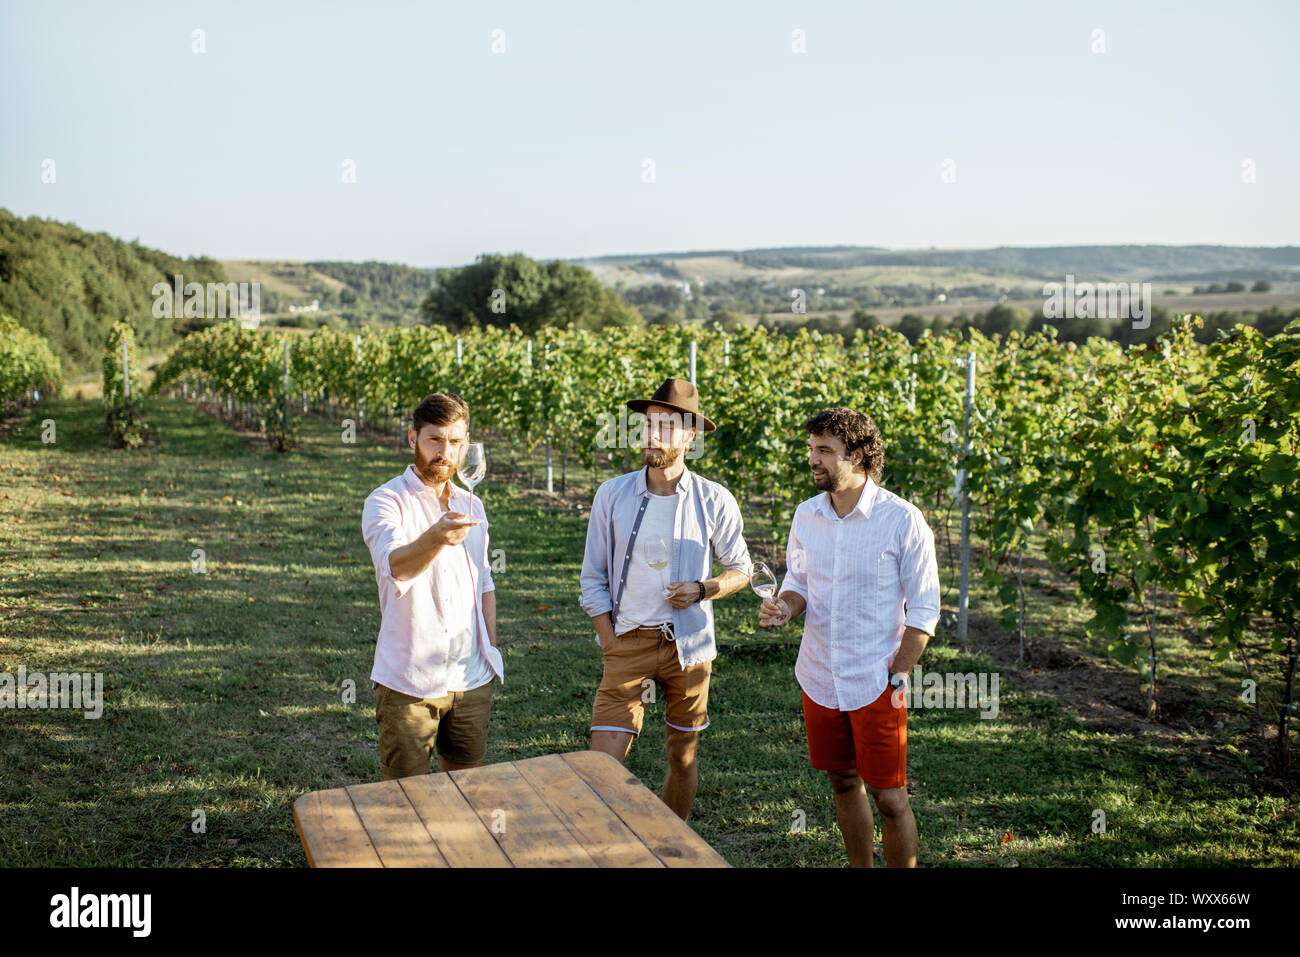 Three guys dressed casually tasting wine while spending time together on the vineyard on a sunny summer morning Stock Photo